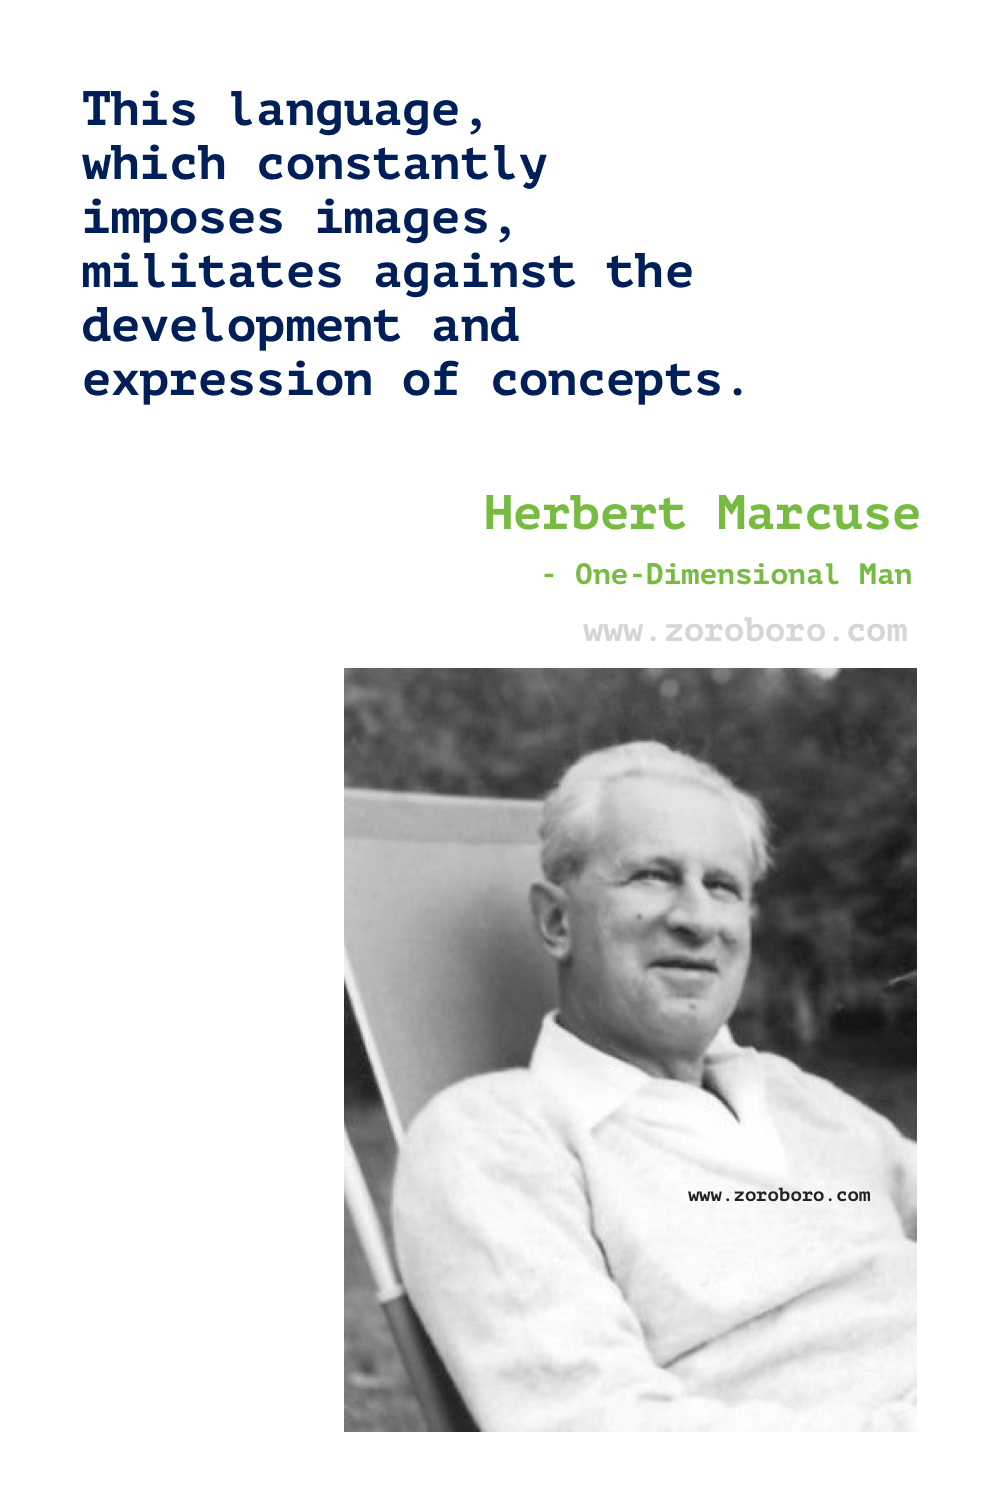 Herbert Marcuse Quotes. Herbert Marcuse One-Dimensional Man Quotes. An Essay on Liberation. Herbert Marcuse Philosophy. Herbert Marcuse Books Quotes. Critique of capitalism. Herbert Marcuse